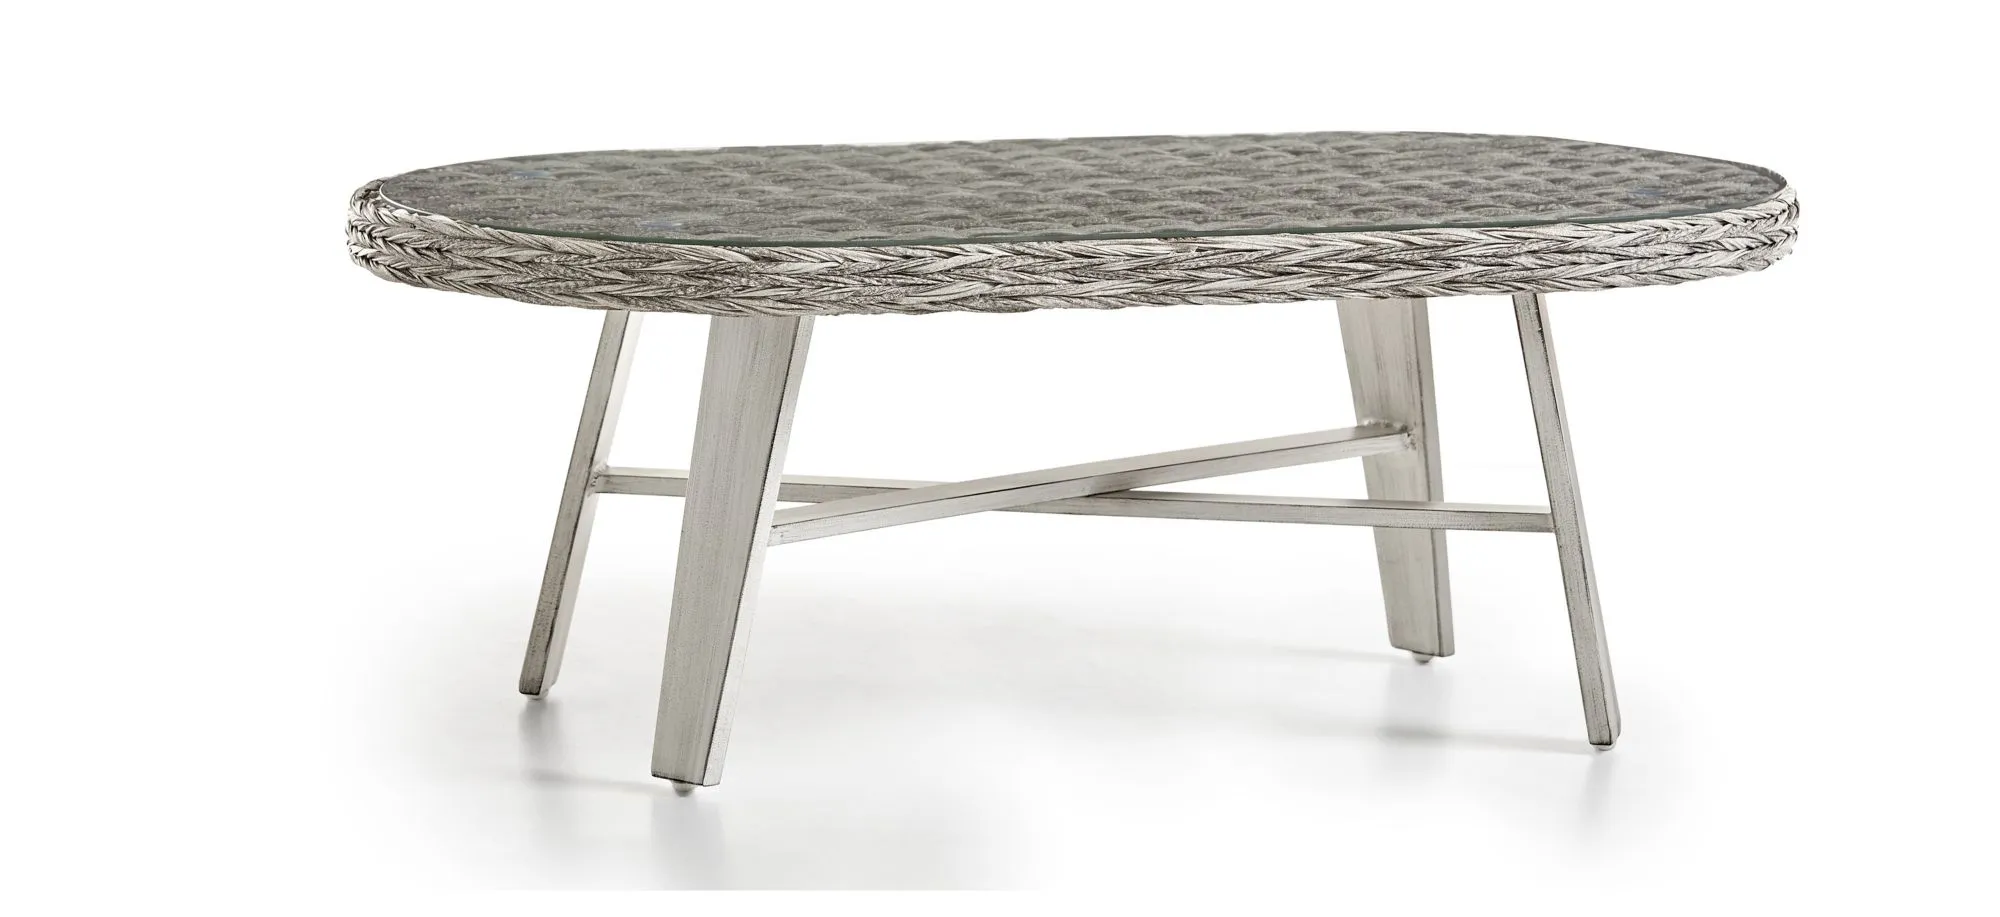 Grand Isle Sgr Outdoor Coffee Table in Soft Granite by South Sea Outdoor Living